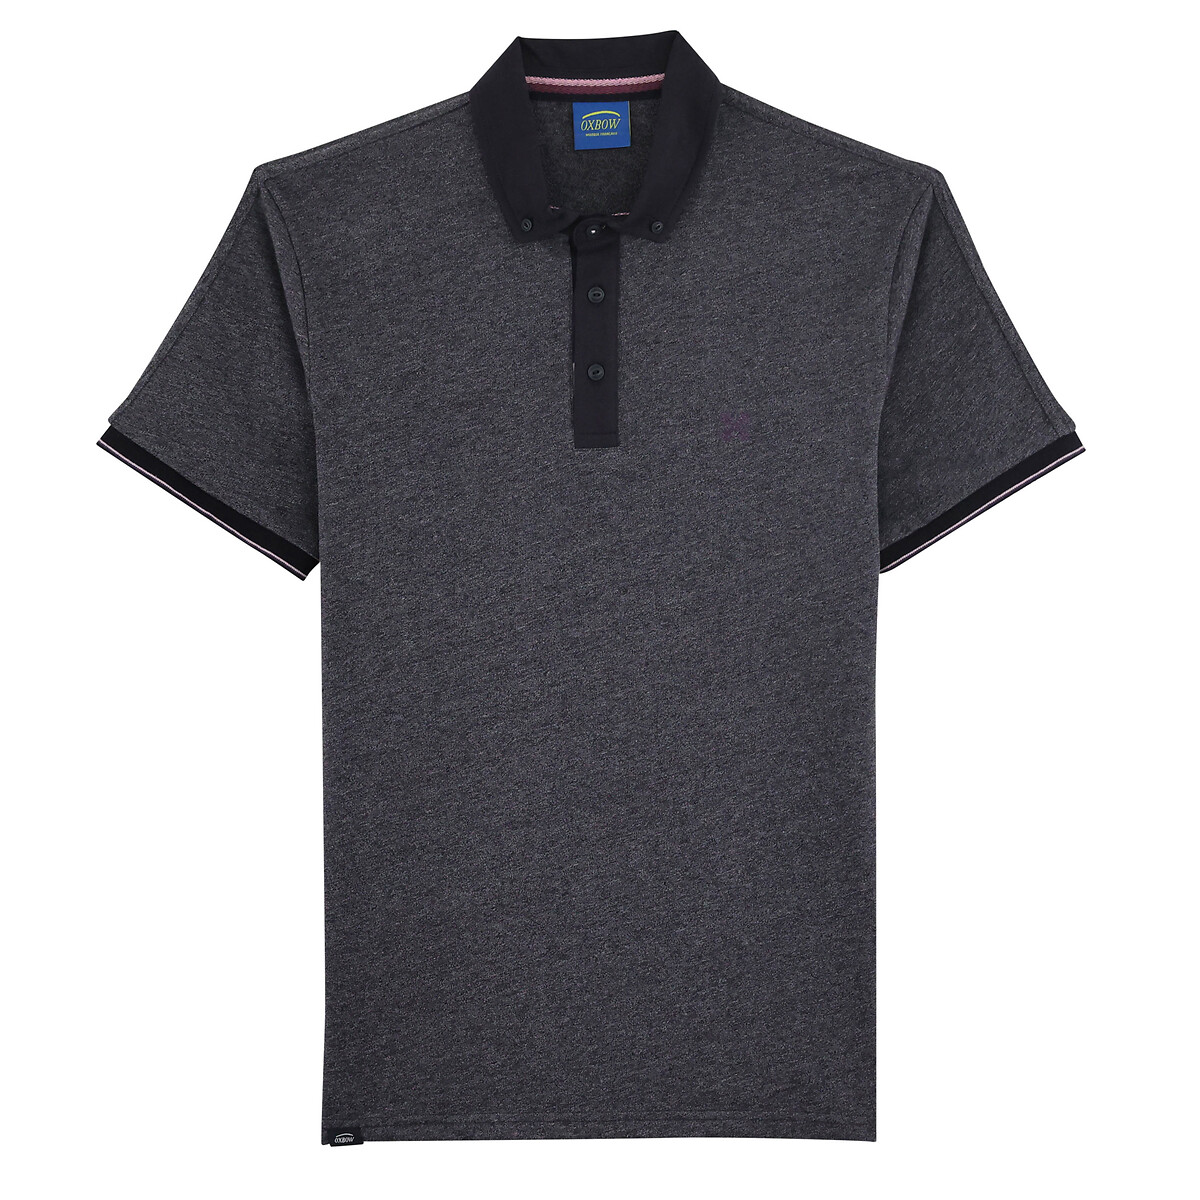 Mottled Cotton Mix Polo Shirt in Jersey with Short Sleeves